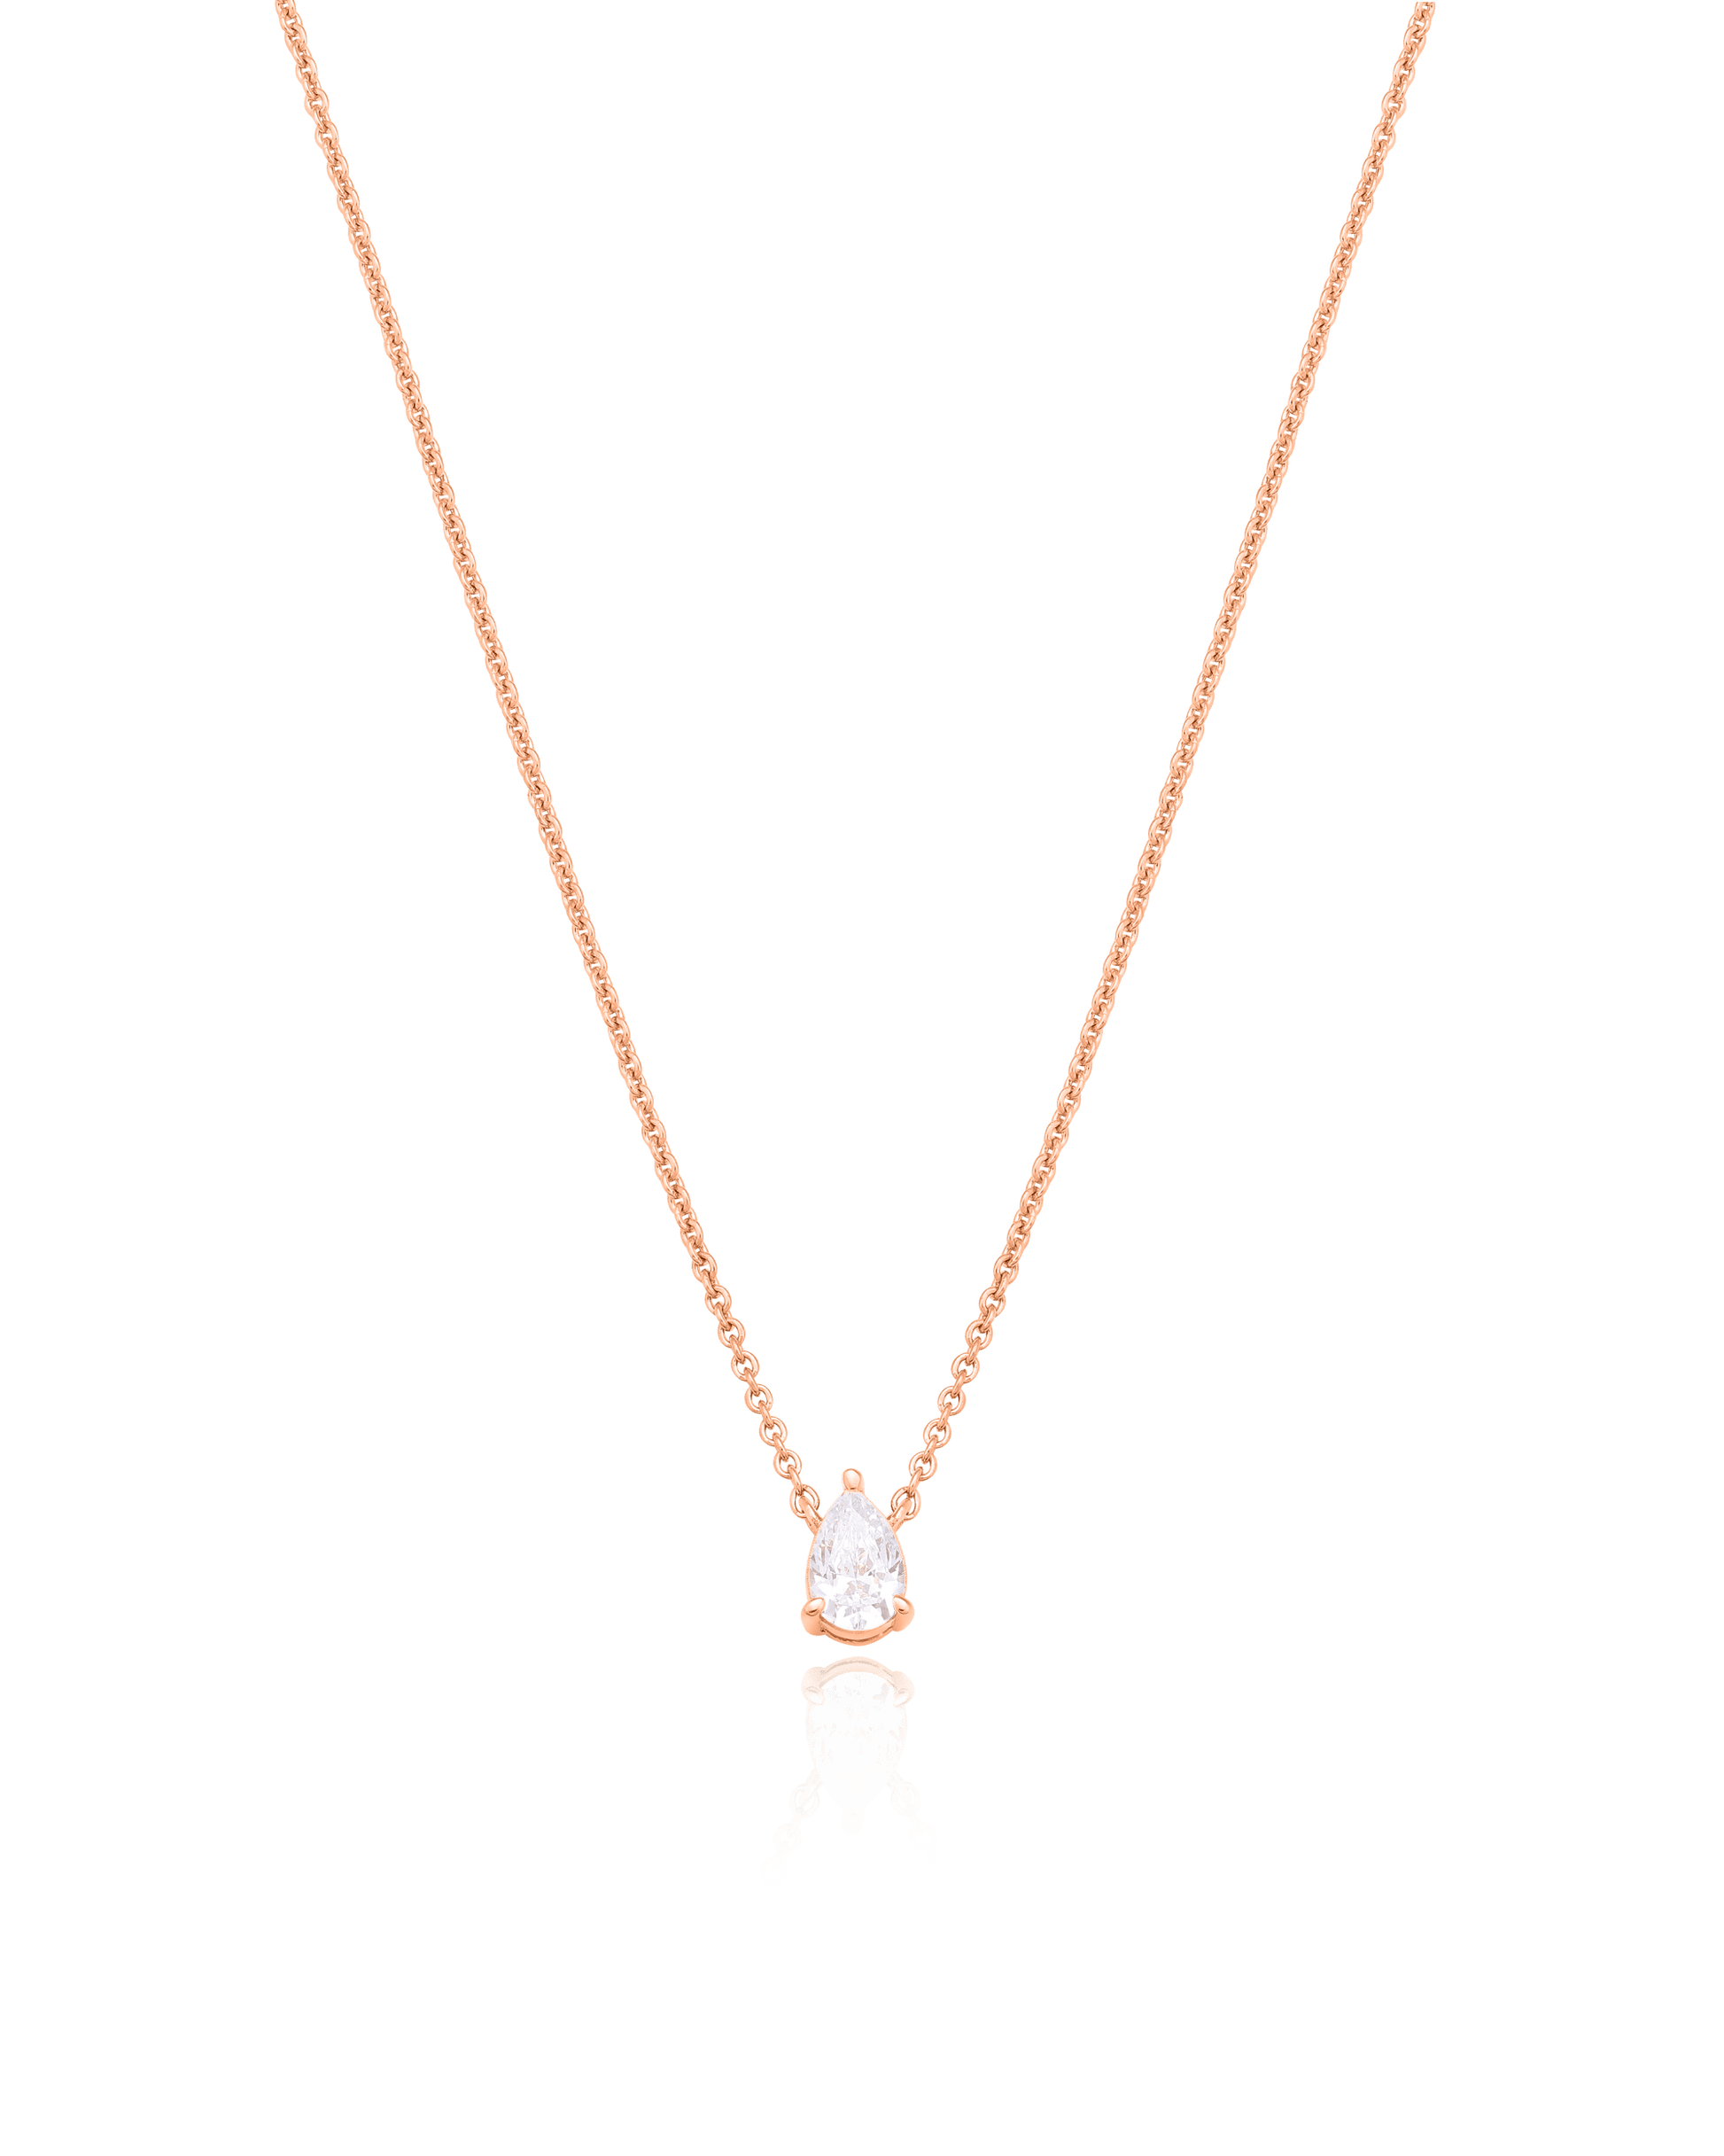 Pear Solitaire Diamond Necklace - 14K White Gold Necklaces magal-dev 